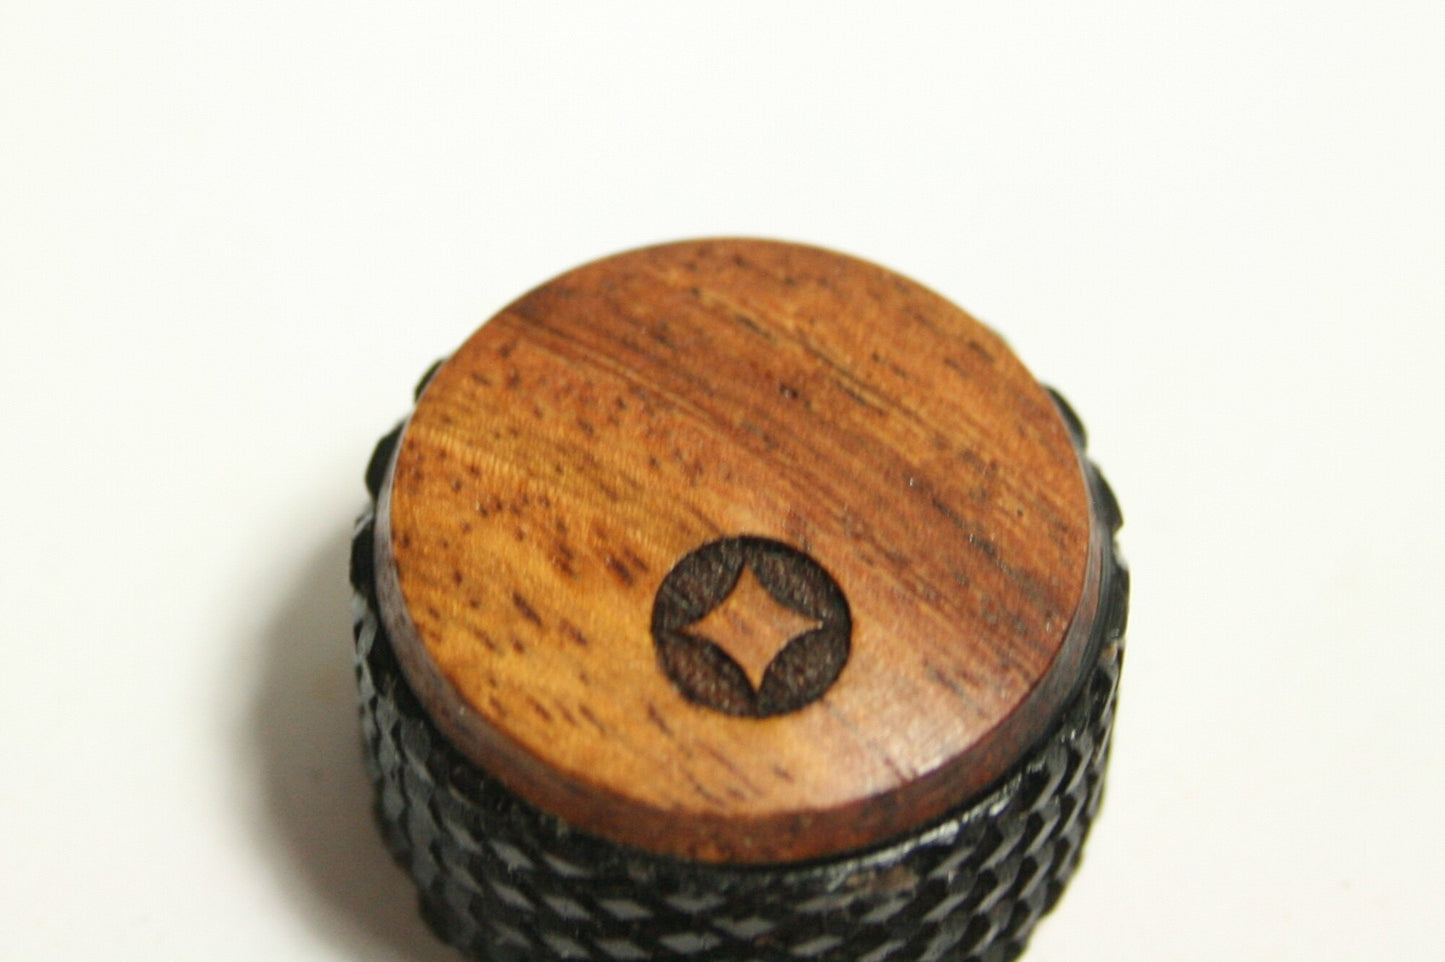 Guitar Knob: Knurled Ebony with Rosewood Cap and Laser Etched Dot (1 inch dia x 11/16 height)